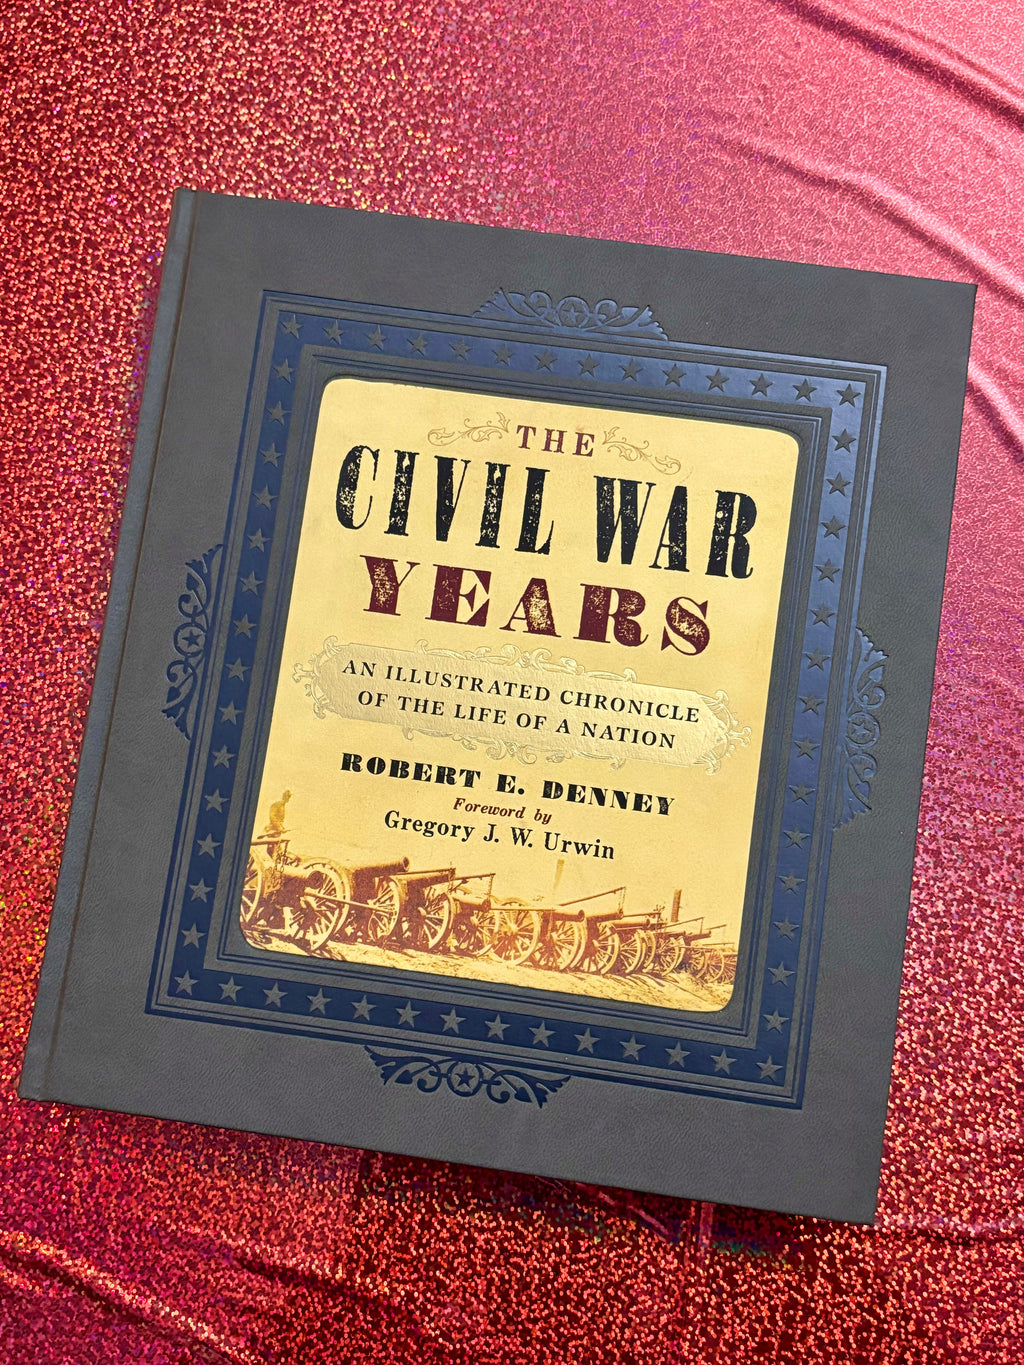 The Civil War years: An Illustrated Chronicle of the Life of a Nation- By Robert E. Denney